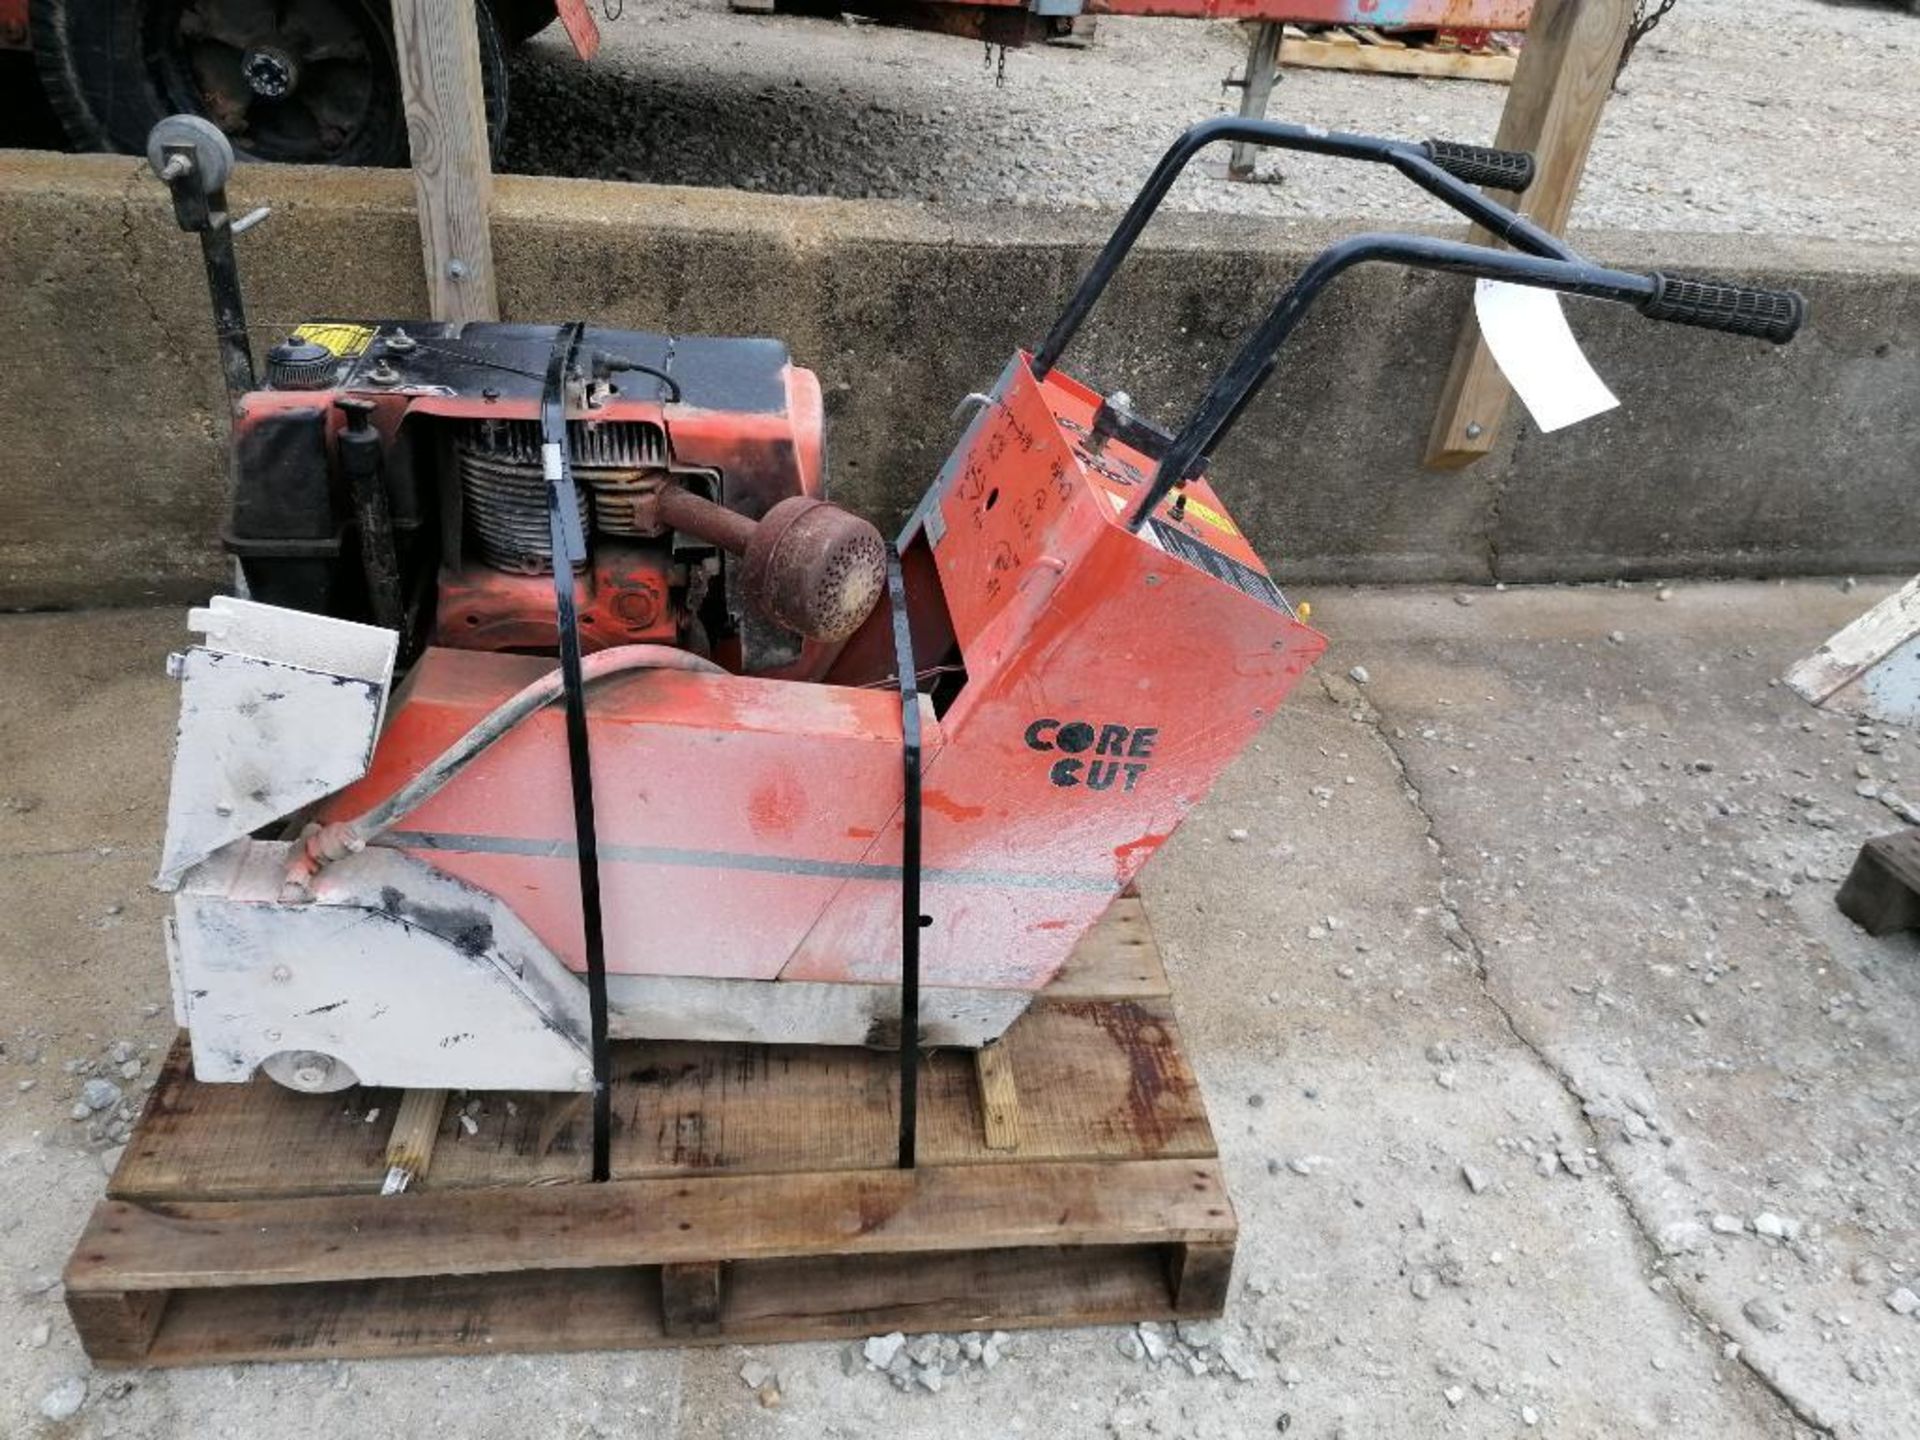 (1) CORE CUT CC1414K Walk Behind Concrete Saw, Serial #1255237 with Kohler Magnum 14 Engine. Located - Image 2 of 15